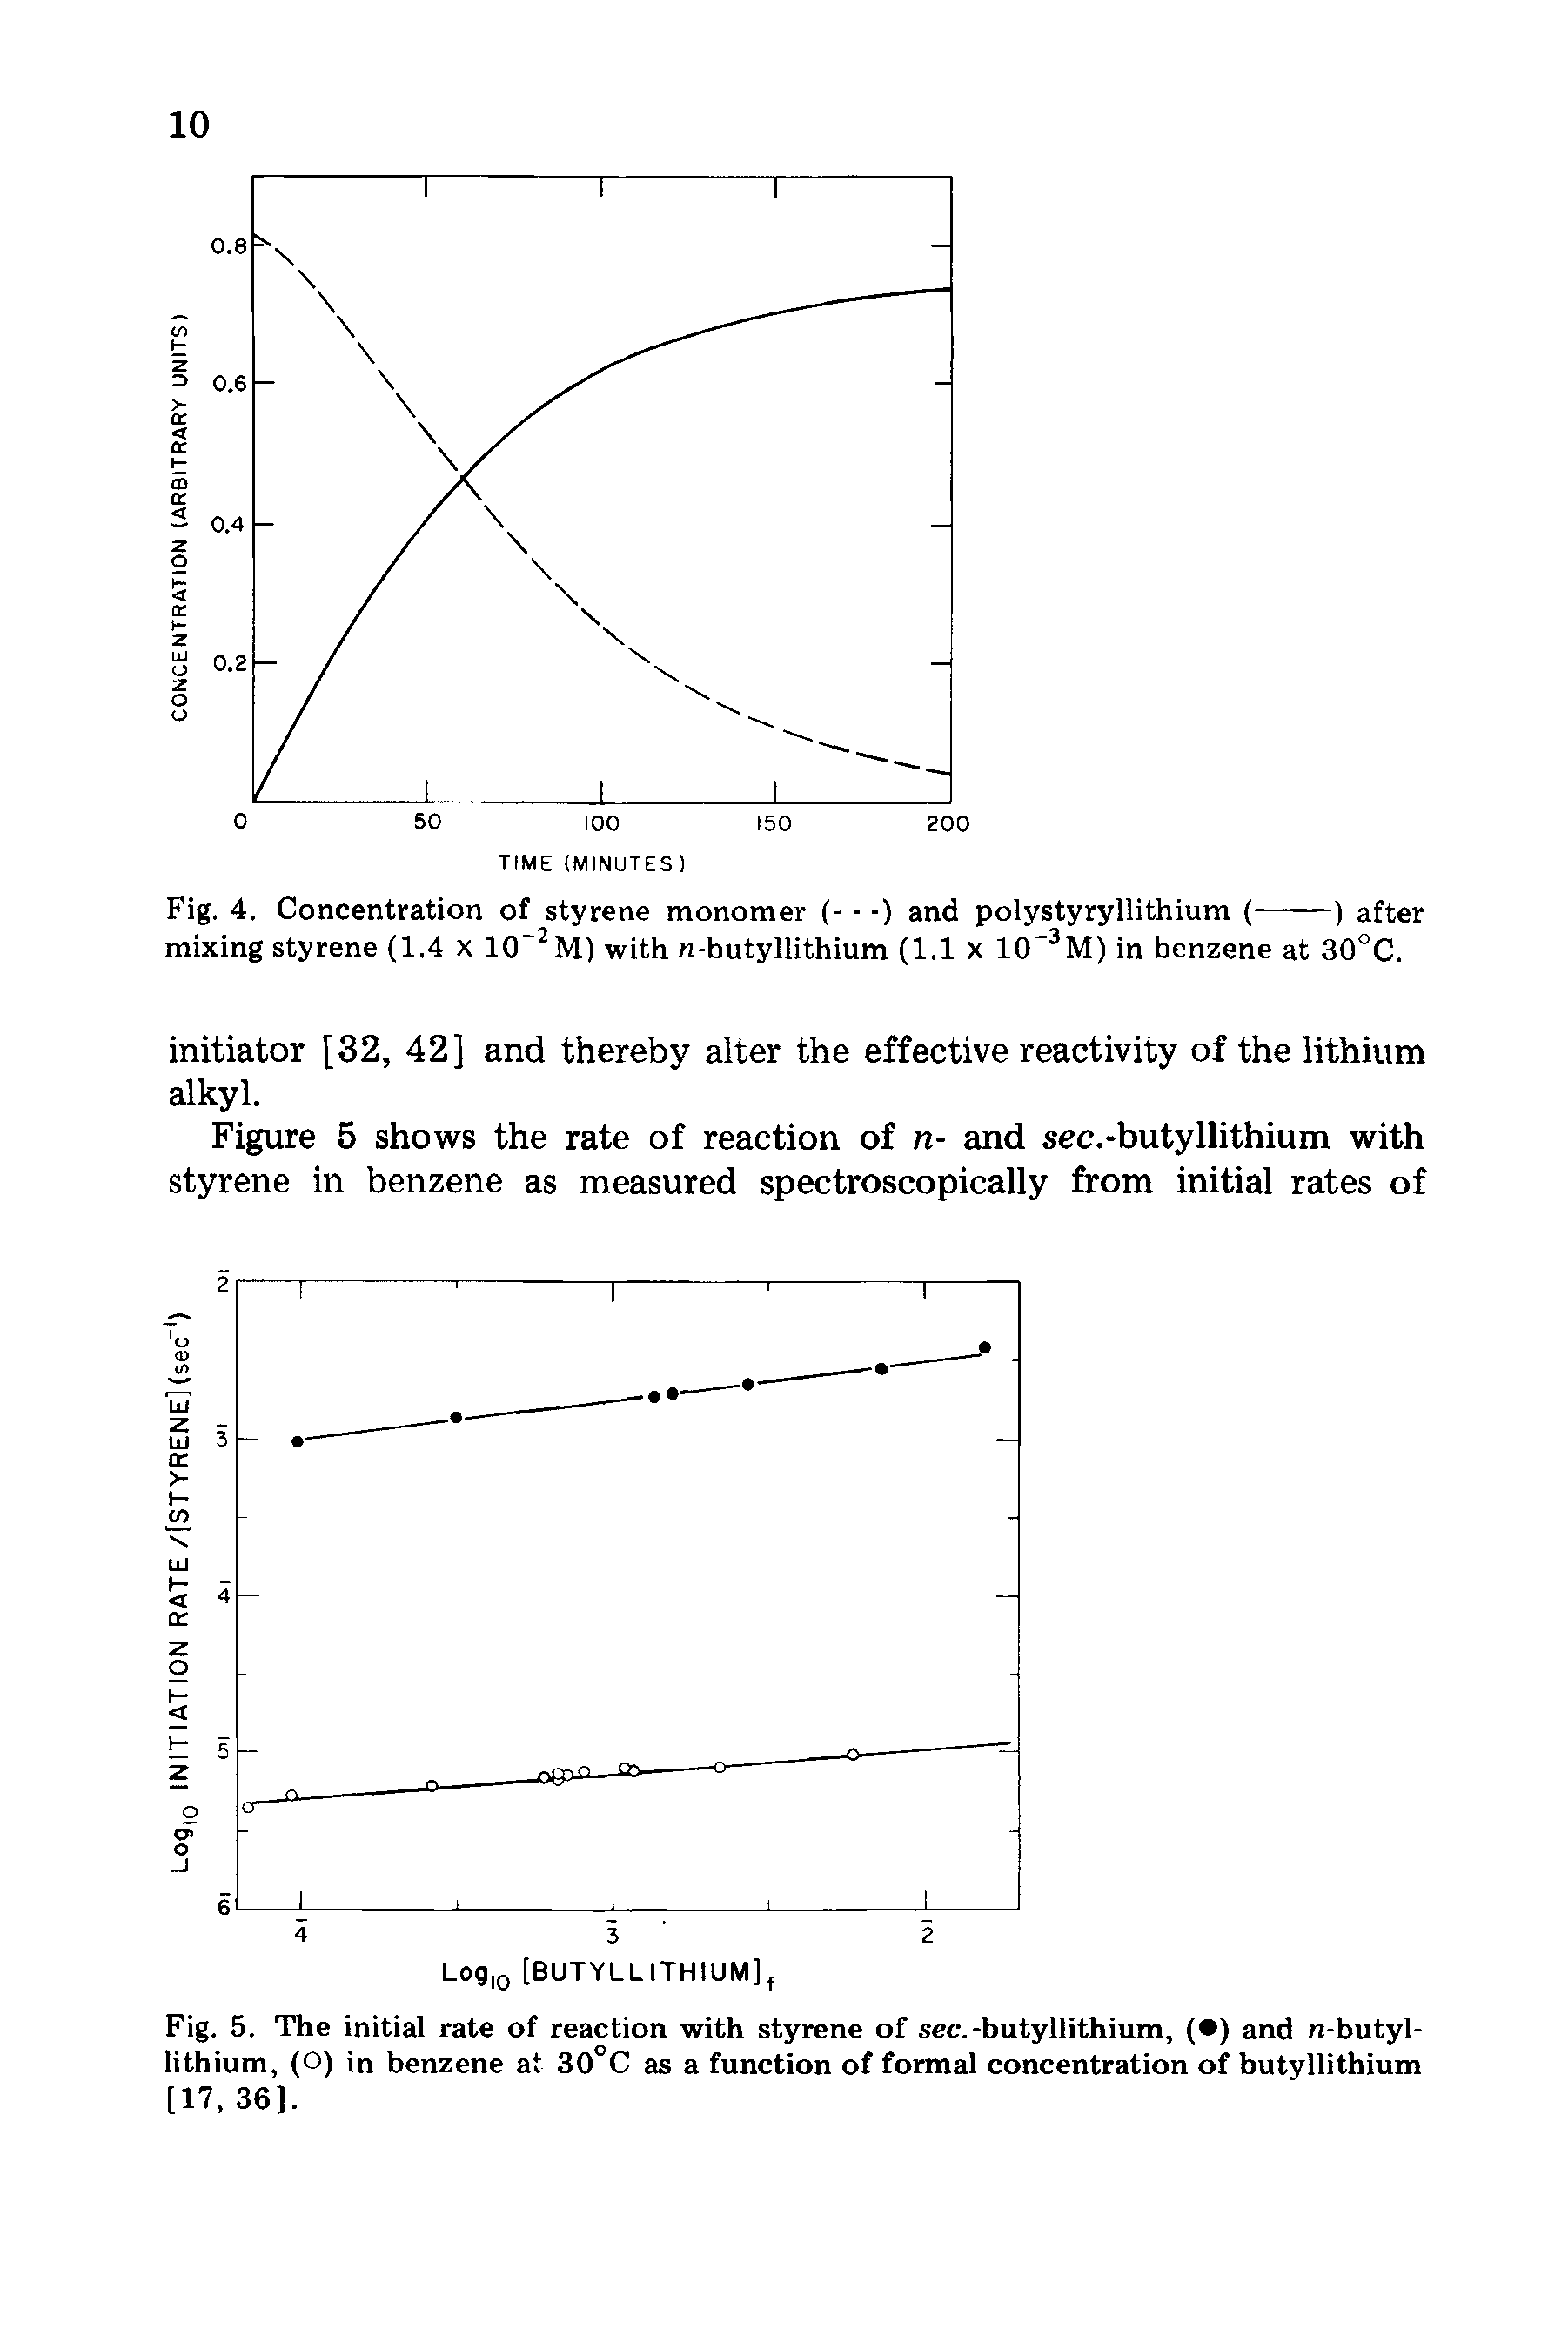 Fig. 5. The initial rate of reaction with styrene of sec.-butyllithium, ( ) and n-butyl-lithium, (O) in benzene at 30 C as a function of formal concentration of butyllithium [17, 36].